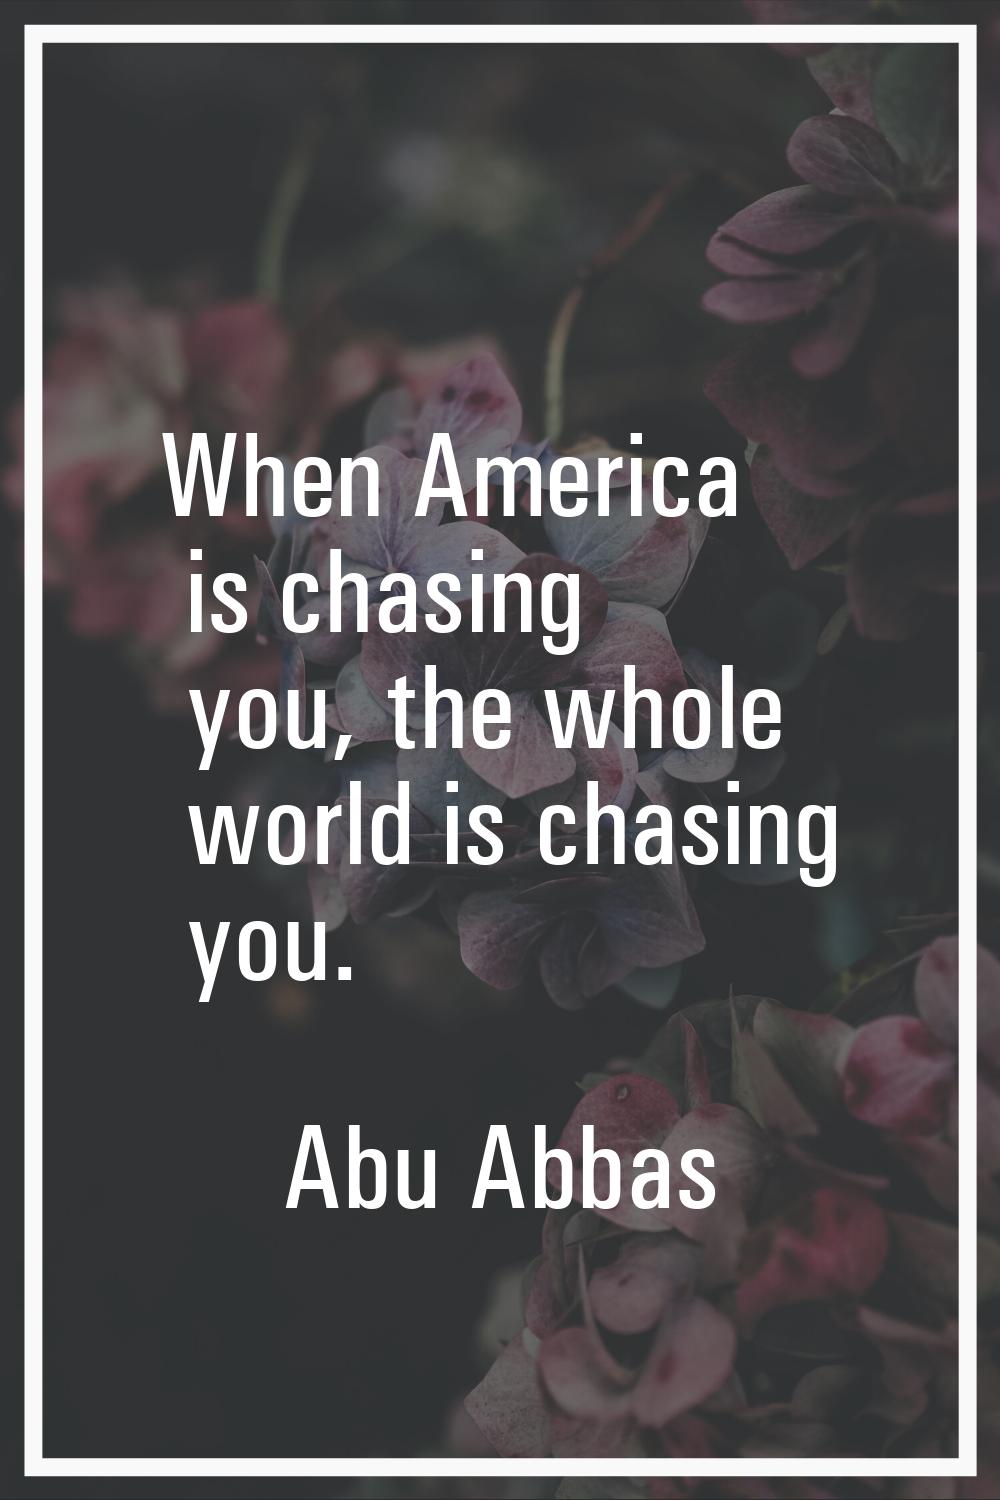 When America is chasing you, the whole world is chasing you.